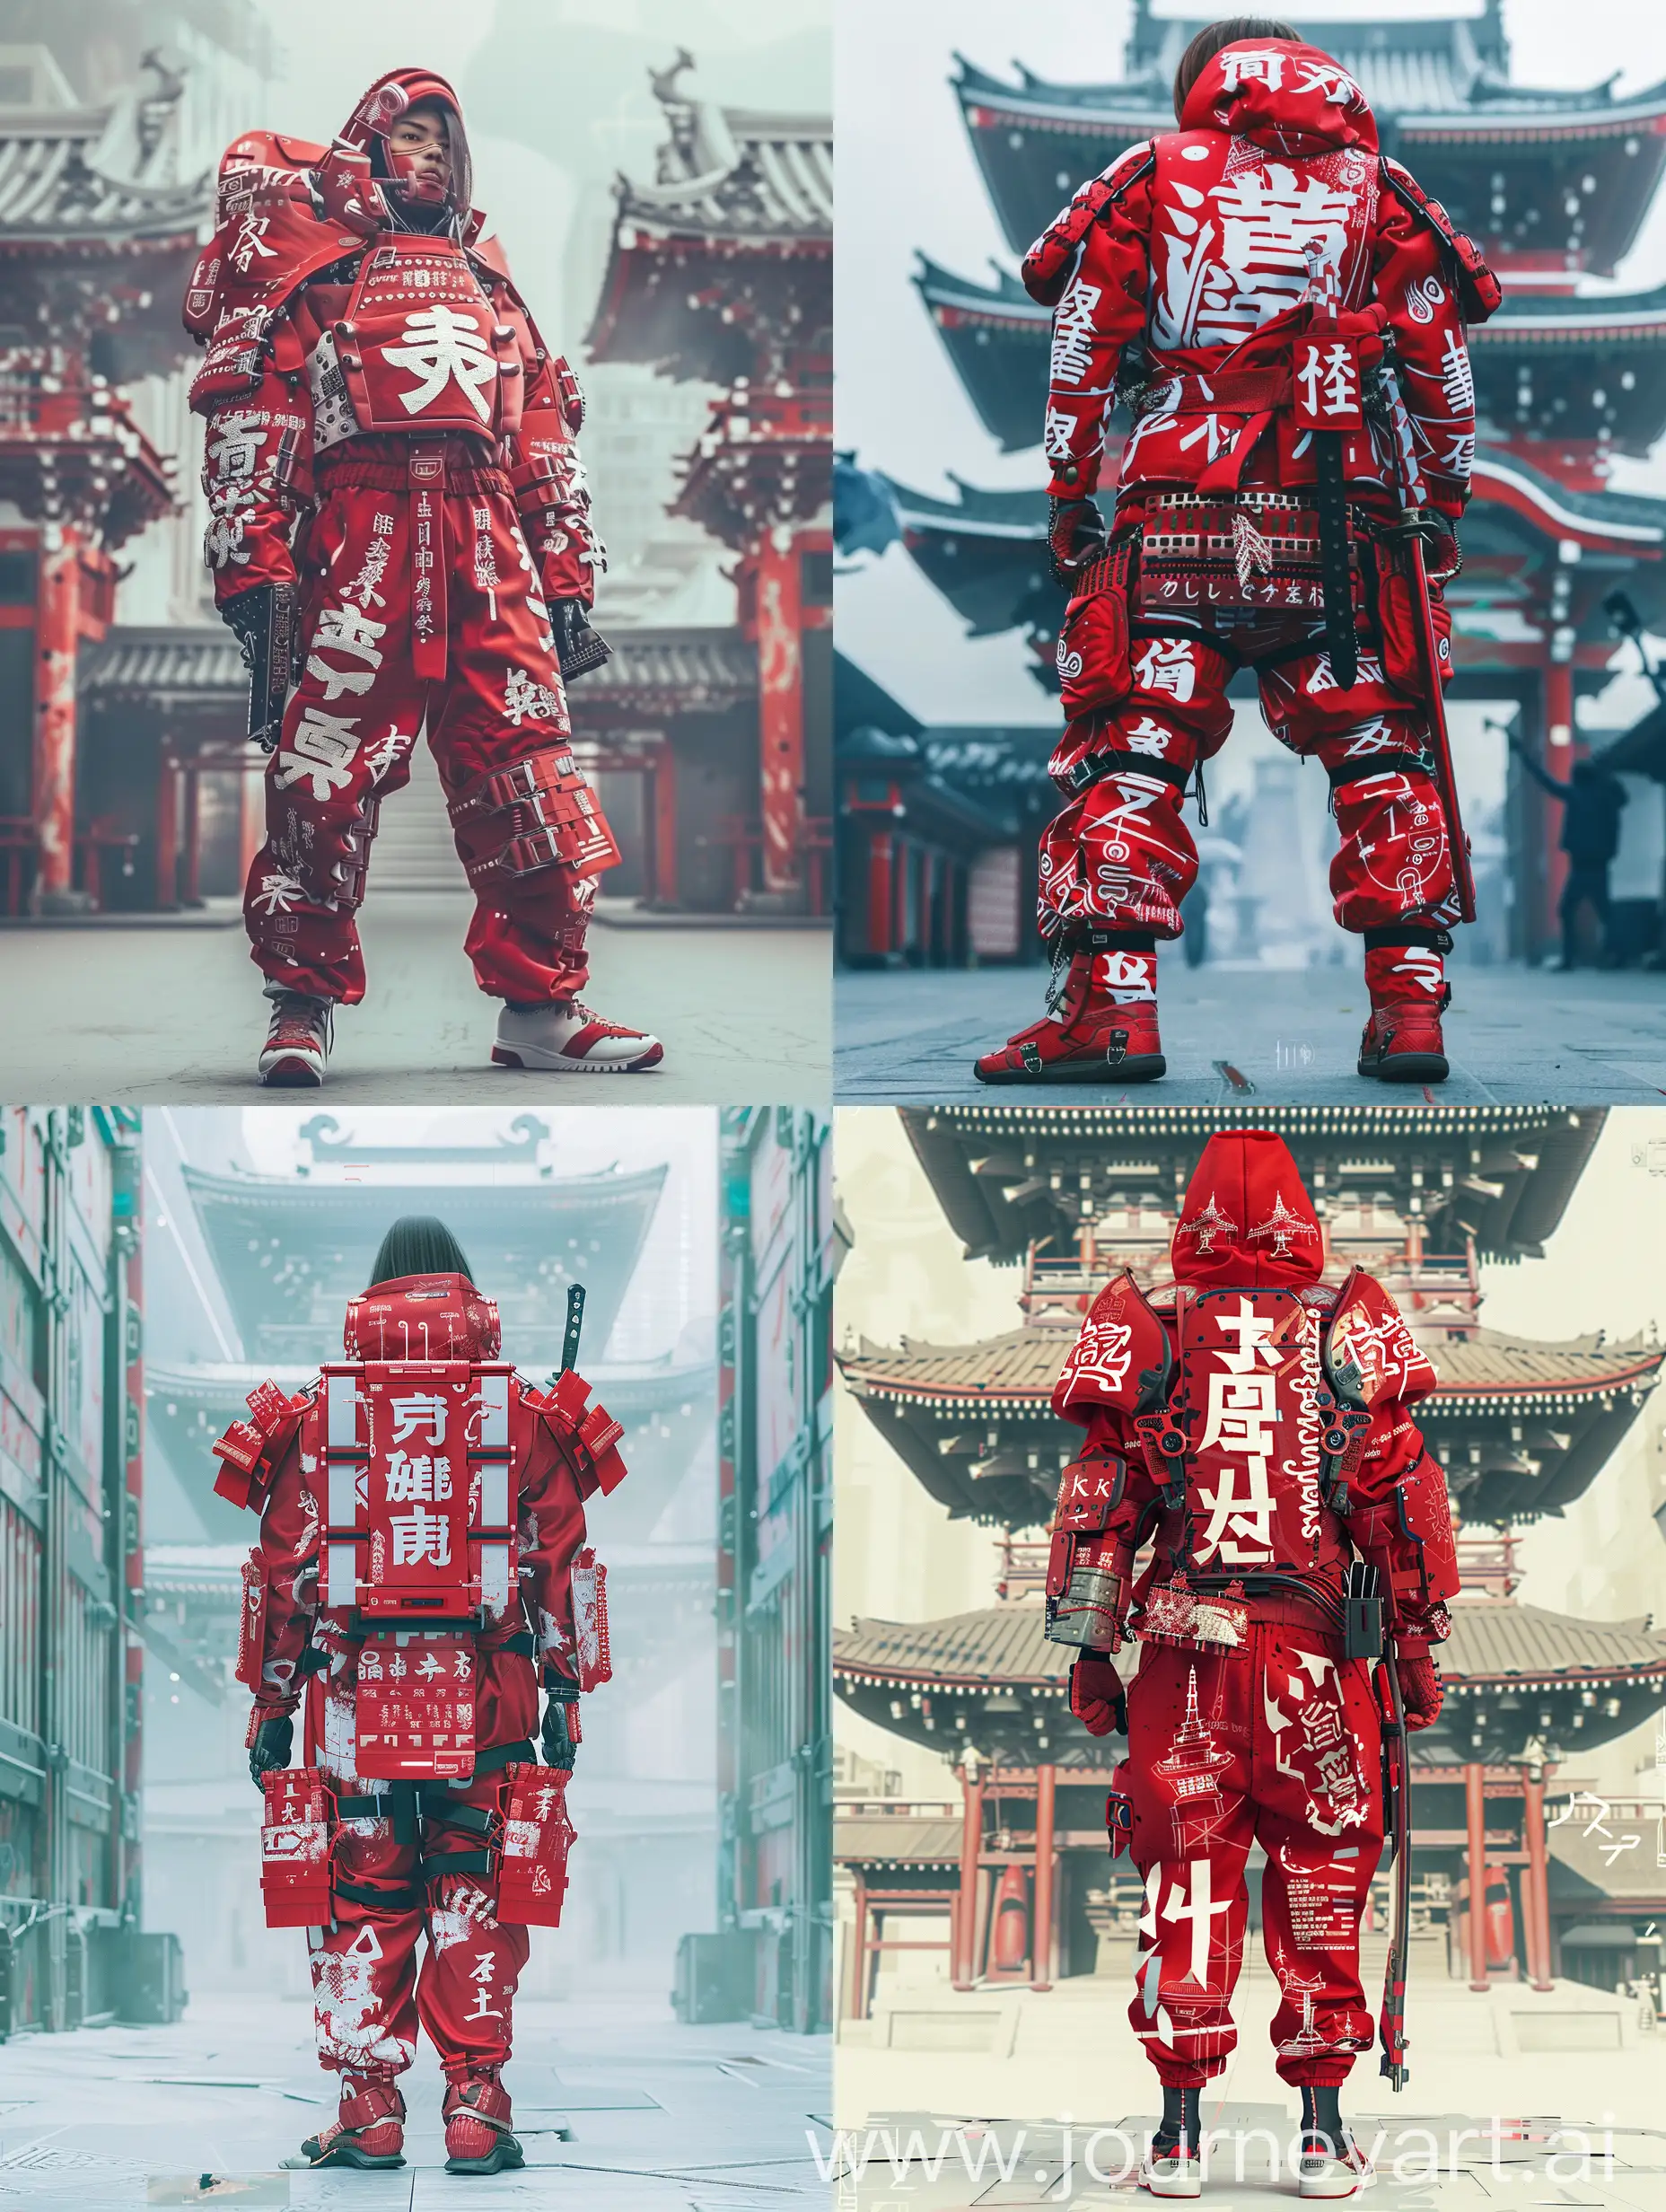 A person wearing an elaborate red Cyberpunk track suit armor, adorned with white Japanese characters and symbols, stands against a japanese temple futuristic background. The armor includes a oni maks cyber punk, intricate shoulder guards, a chest plate, and arm and leg protectors. The individual carries a sheathed sword at their side and a smaller dagger at their waist. The overall look is detailed and traditional, exuding a sense of historical Japanese warrior culture.